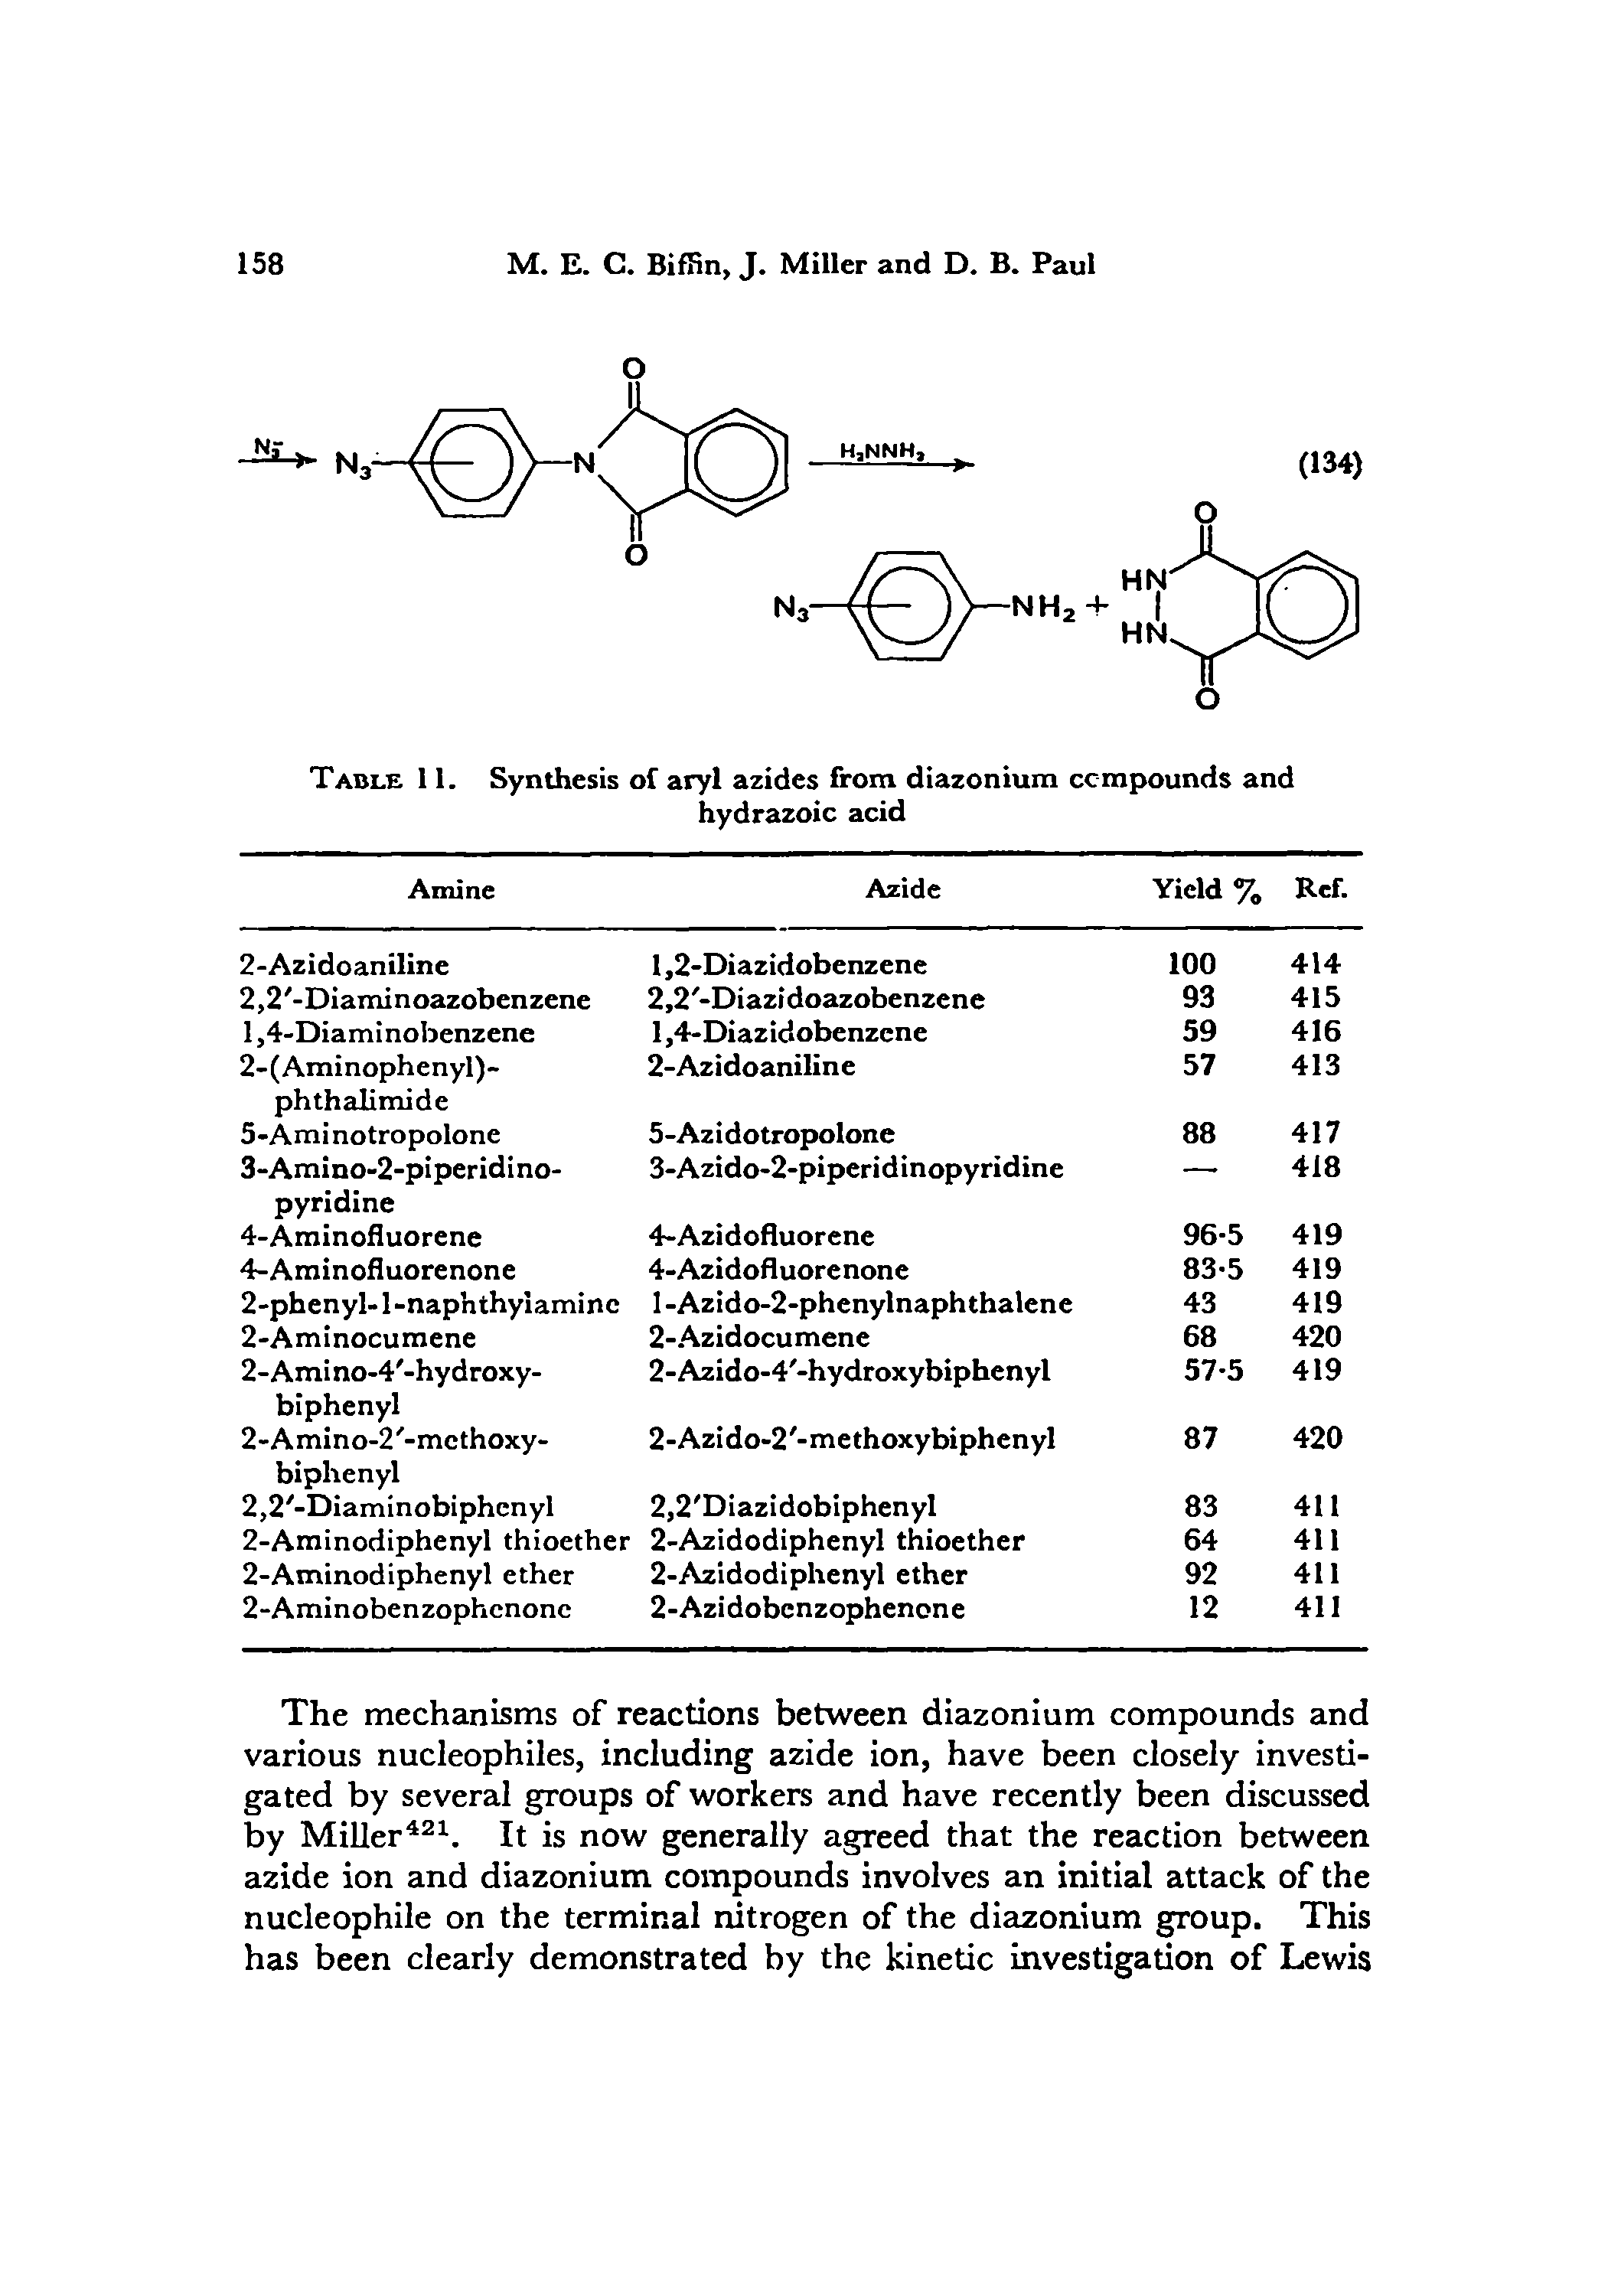 Table 11. Synthesis of aryl azides from diazonium compounds and...